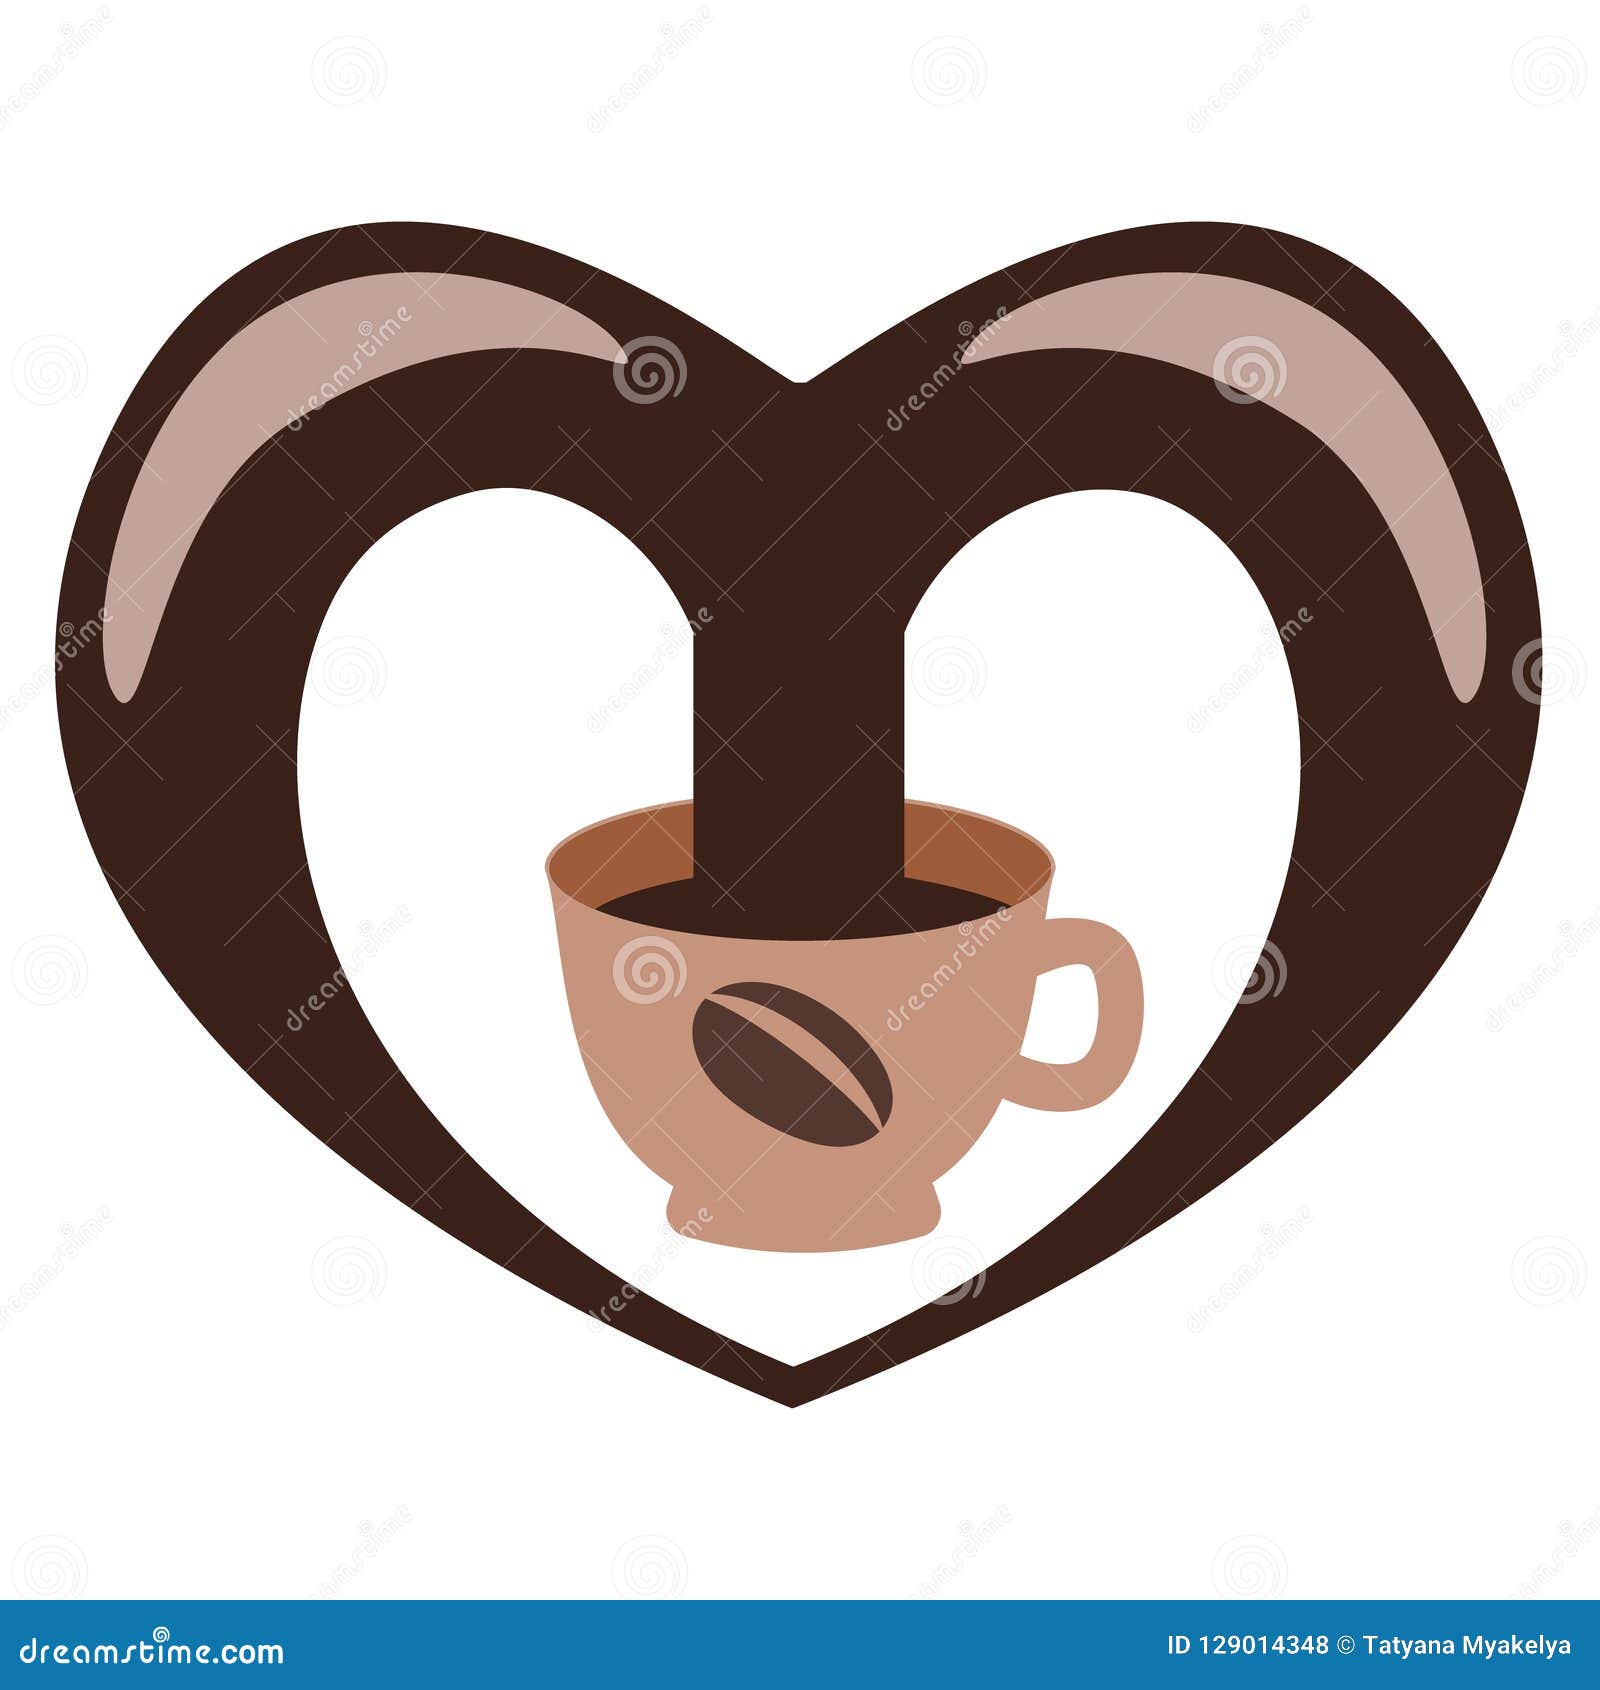 Download Logo Coffee Heart. In The Heart, A Cup Of Coffee. Stock Vector - Illustration of image, shops ...